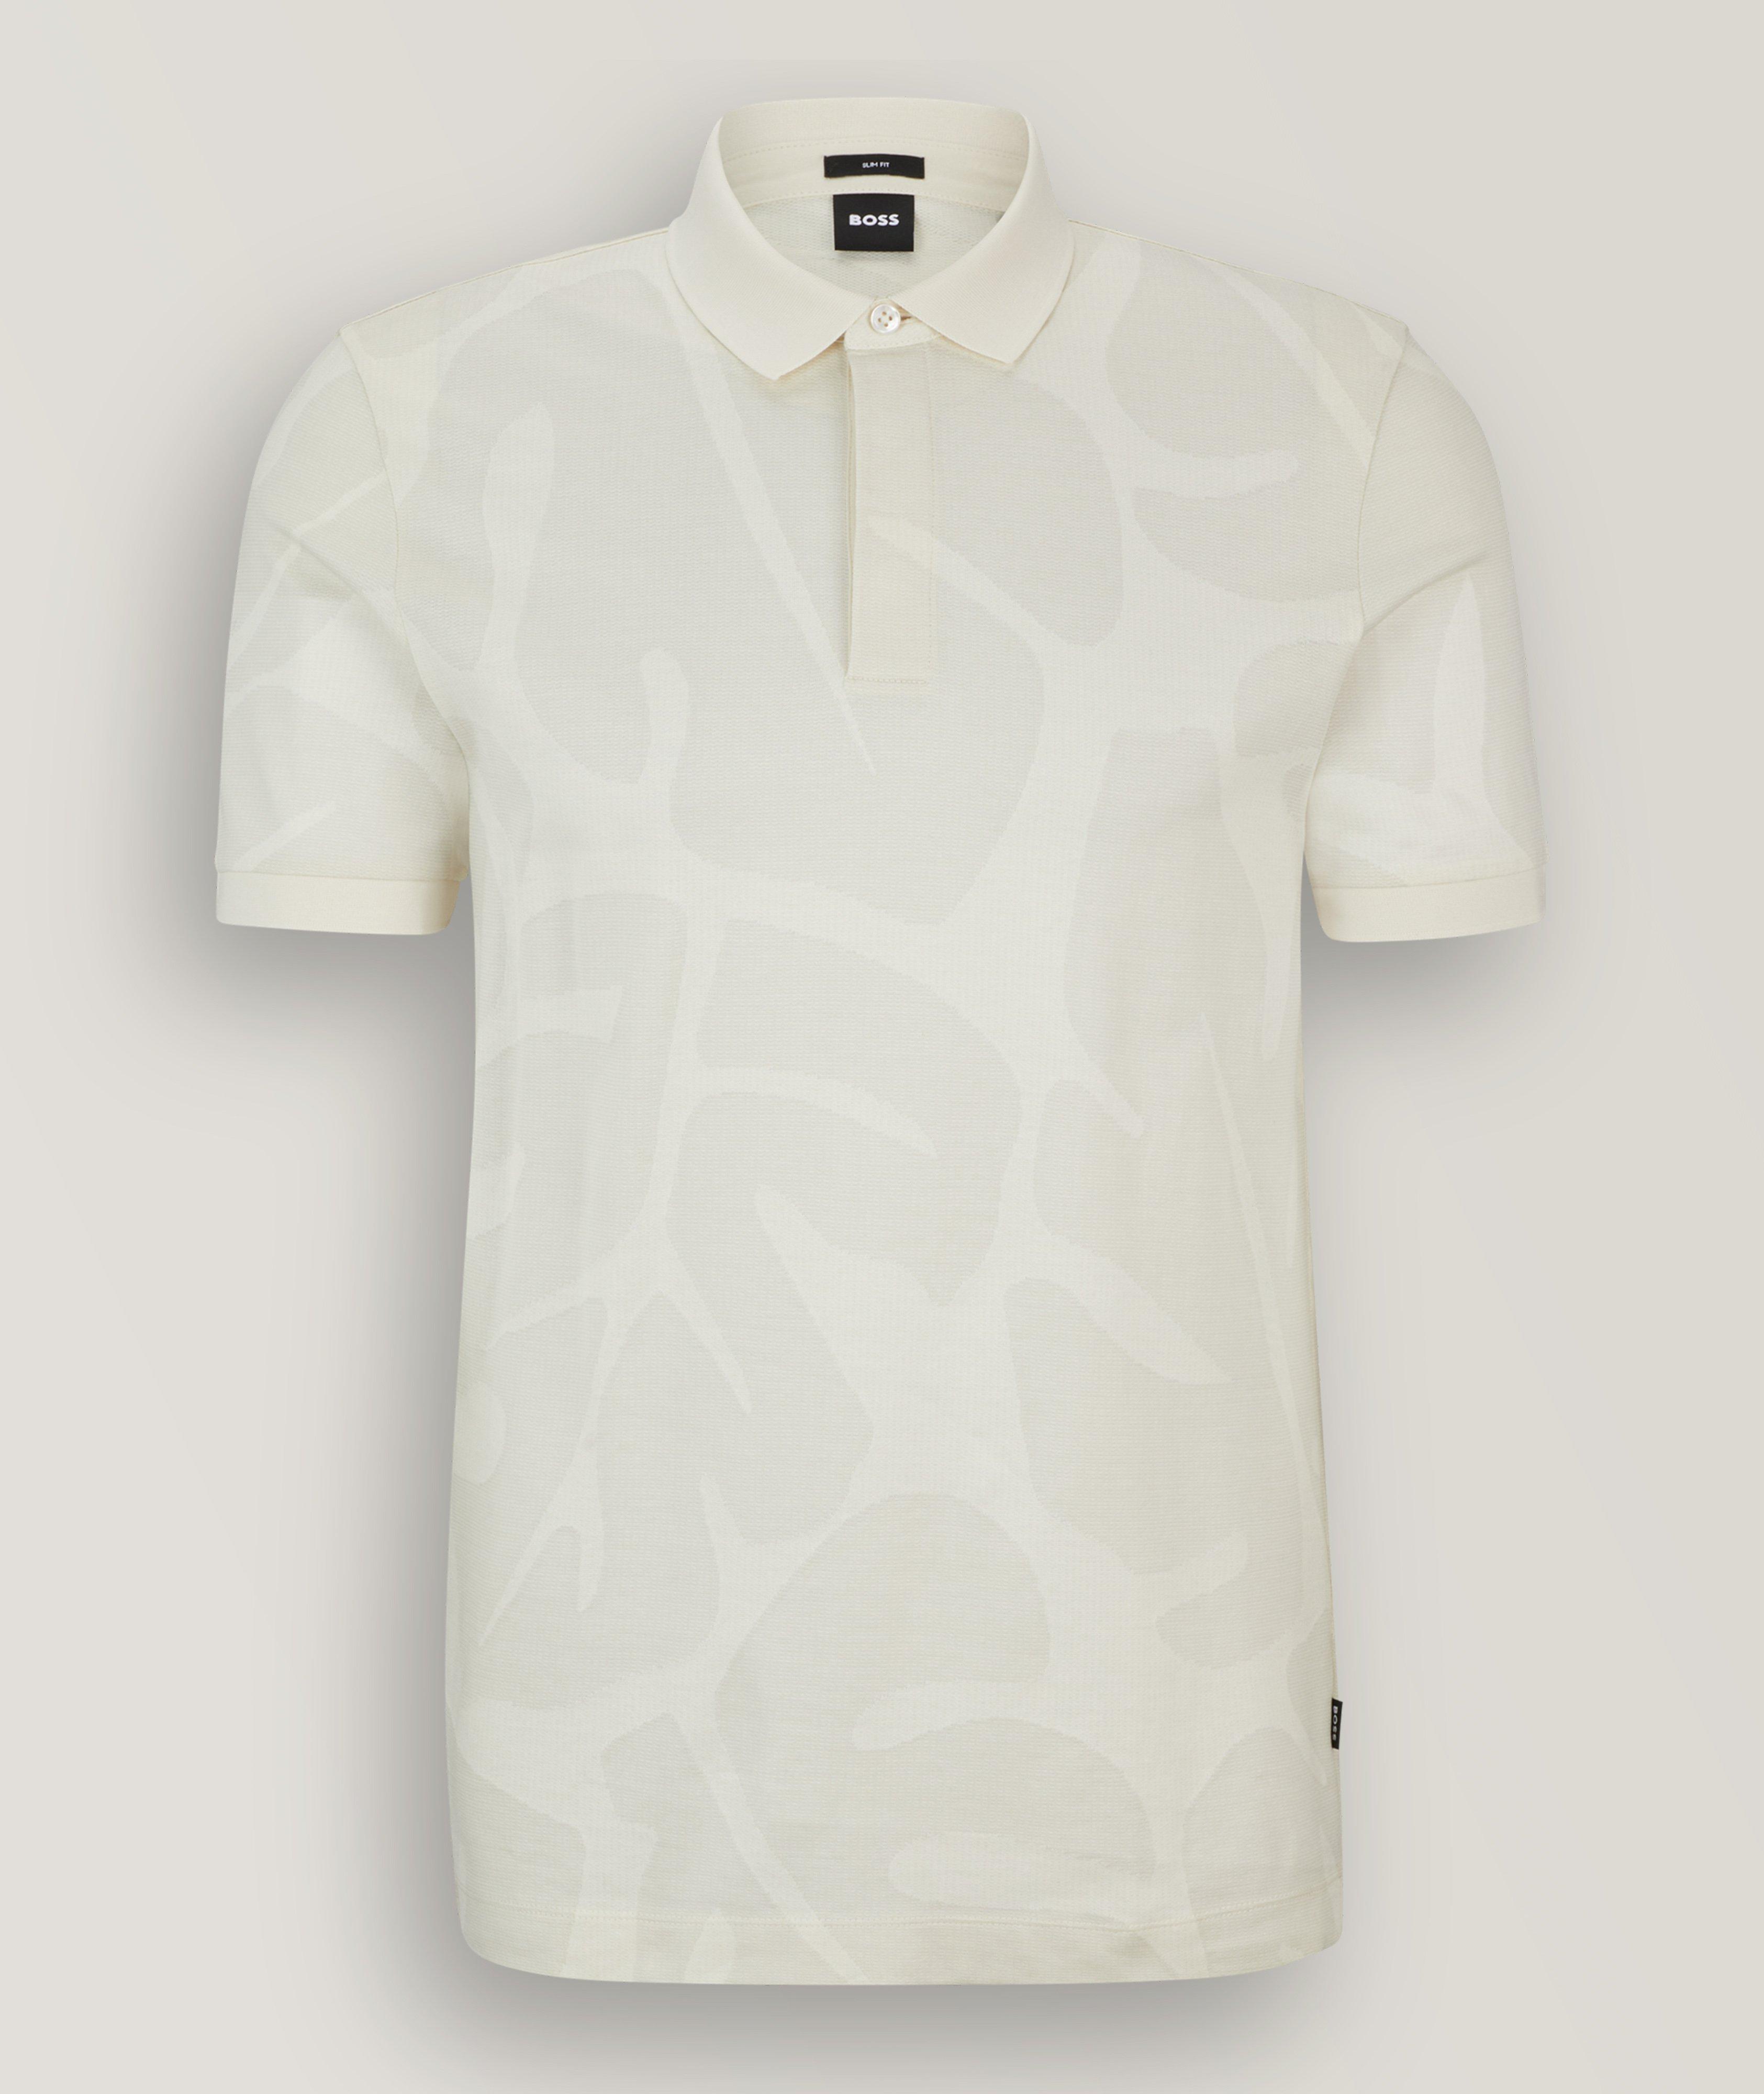 All-Over Monstera Leaf Cotton Polo image 0